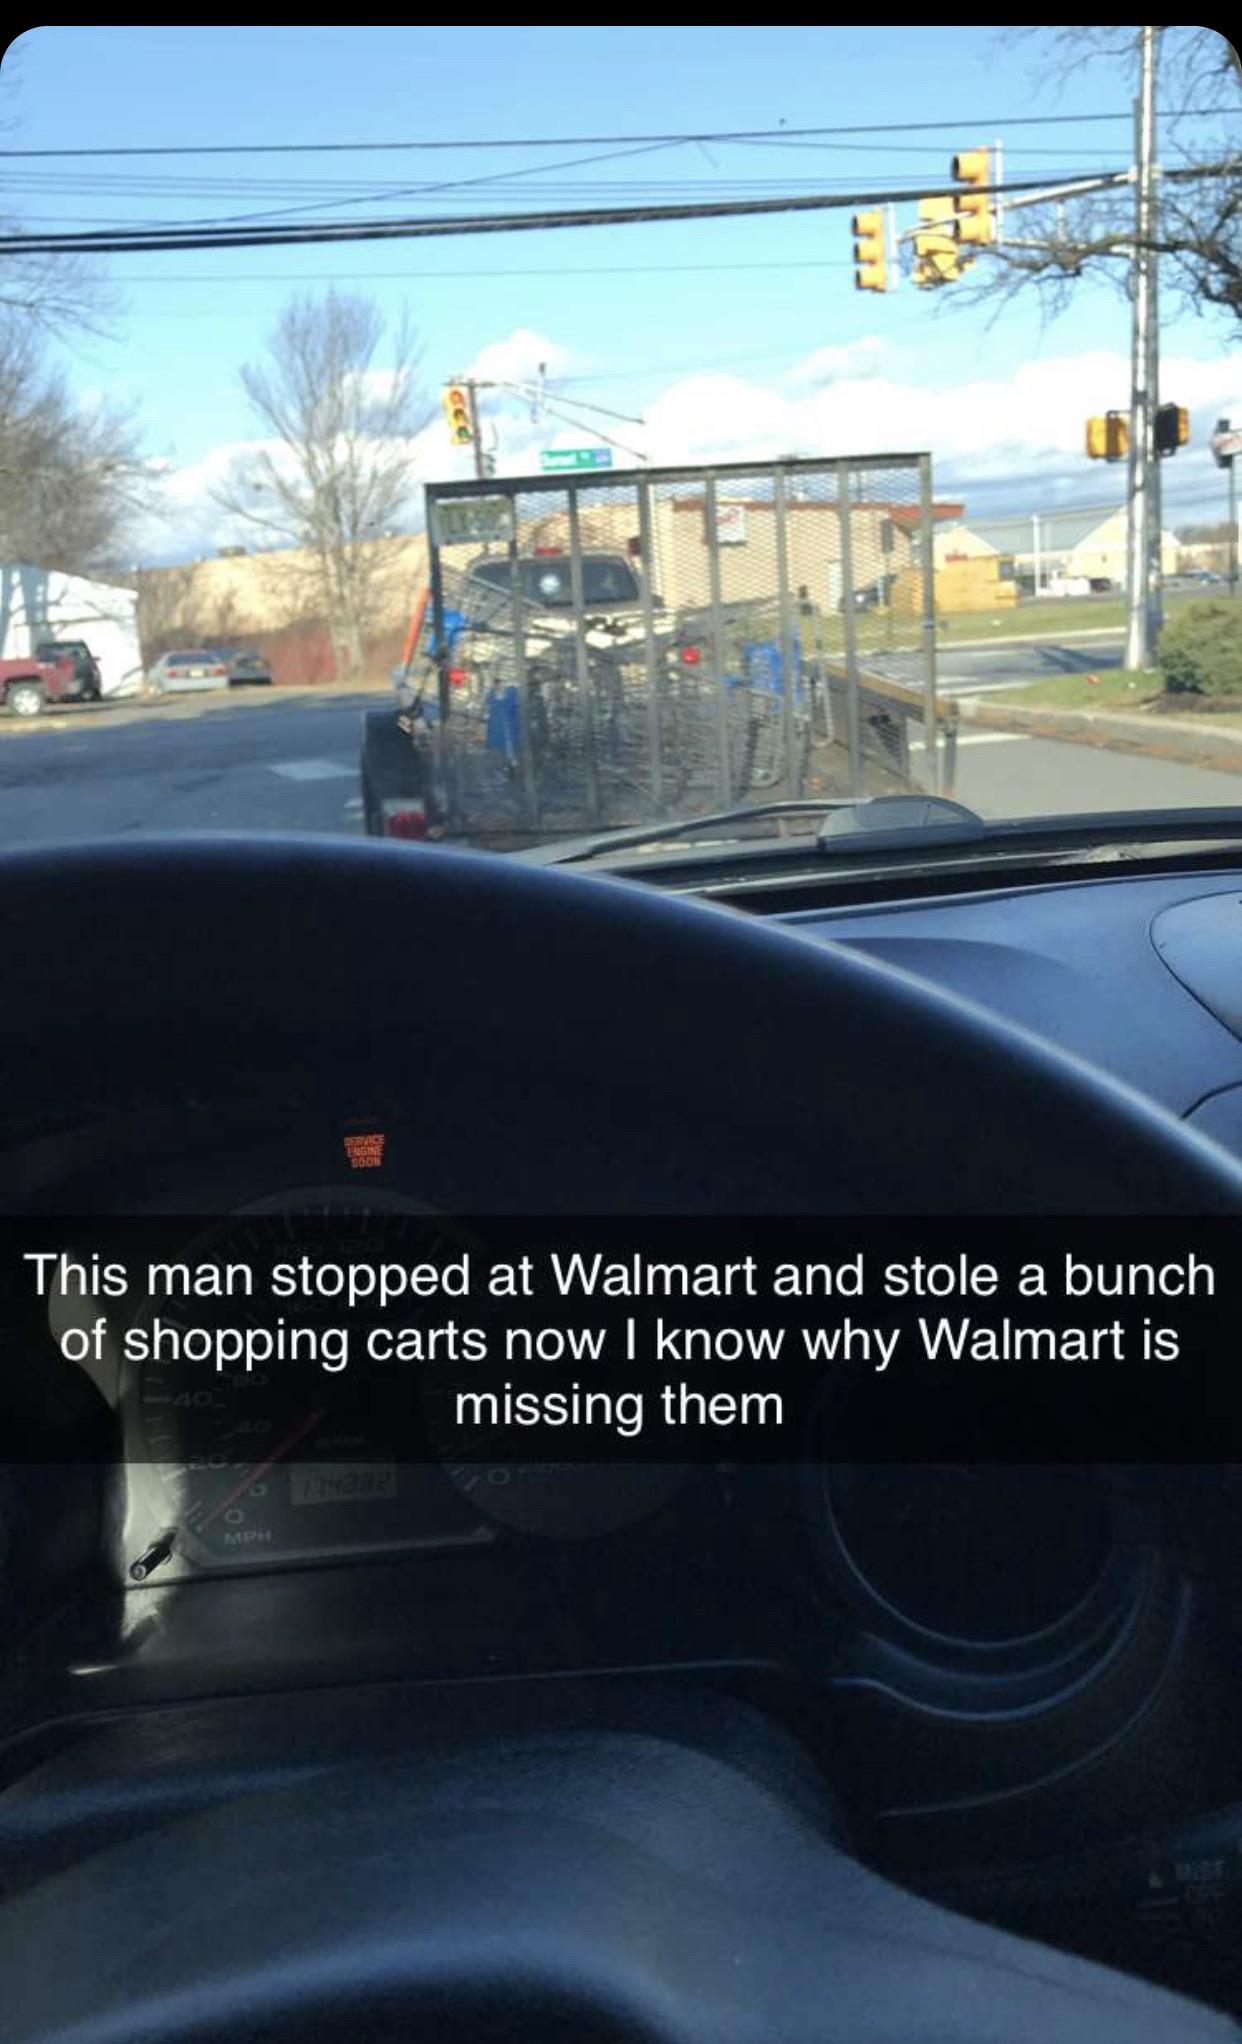 windshield - This man stopped at Walmart and stole a bunch of shopping carts now I know why Walmart is missing them